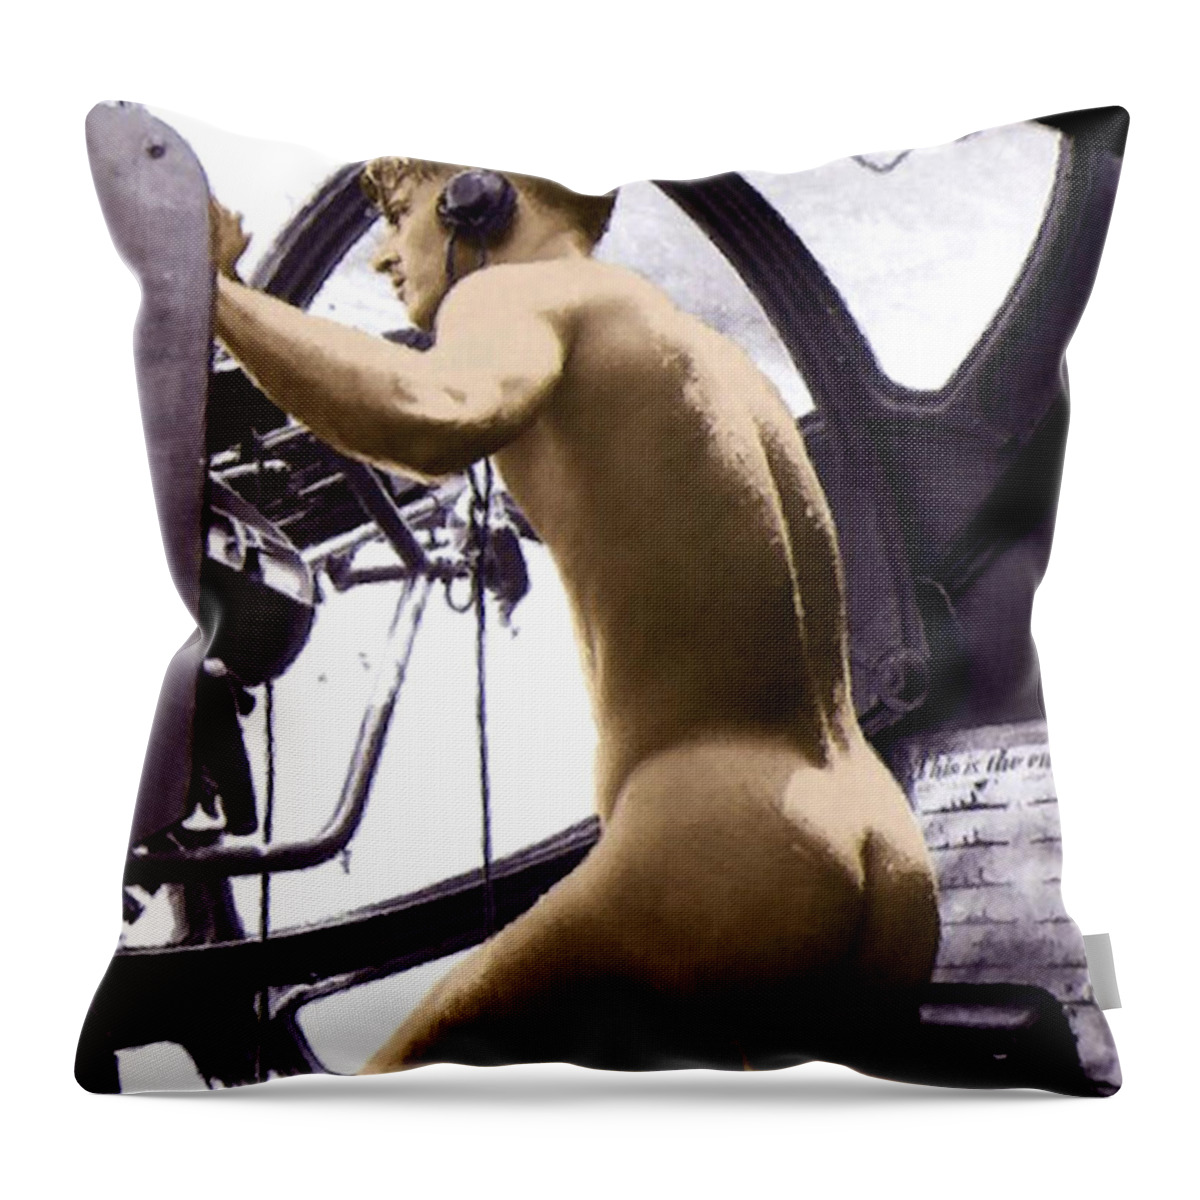 Rabaul Throw Pillow featuring the painting Gunner by Horace Bristol